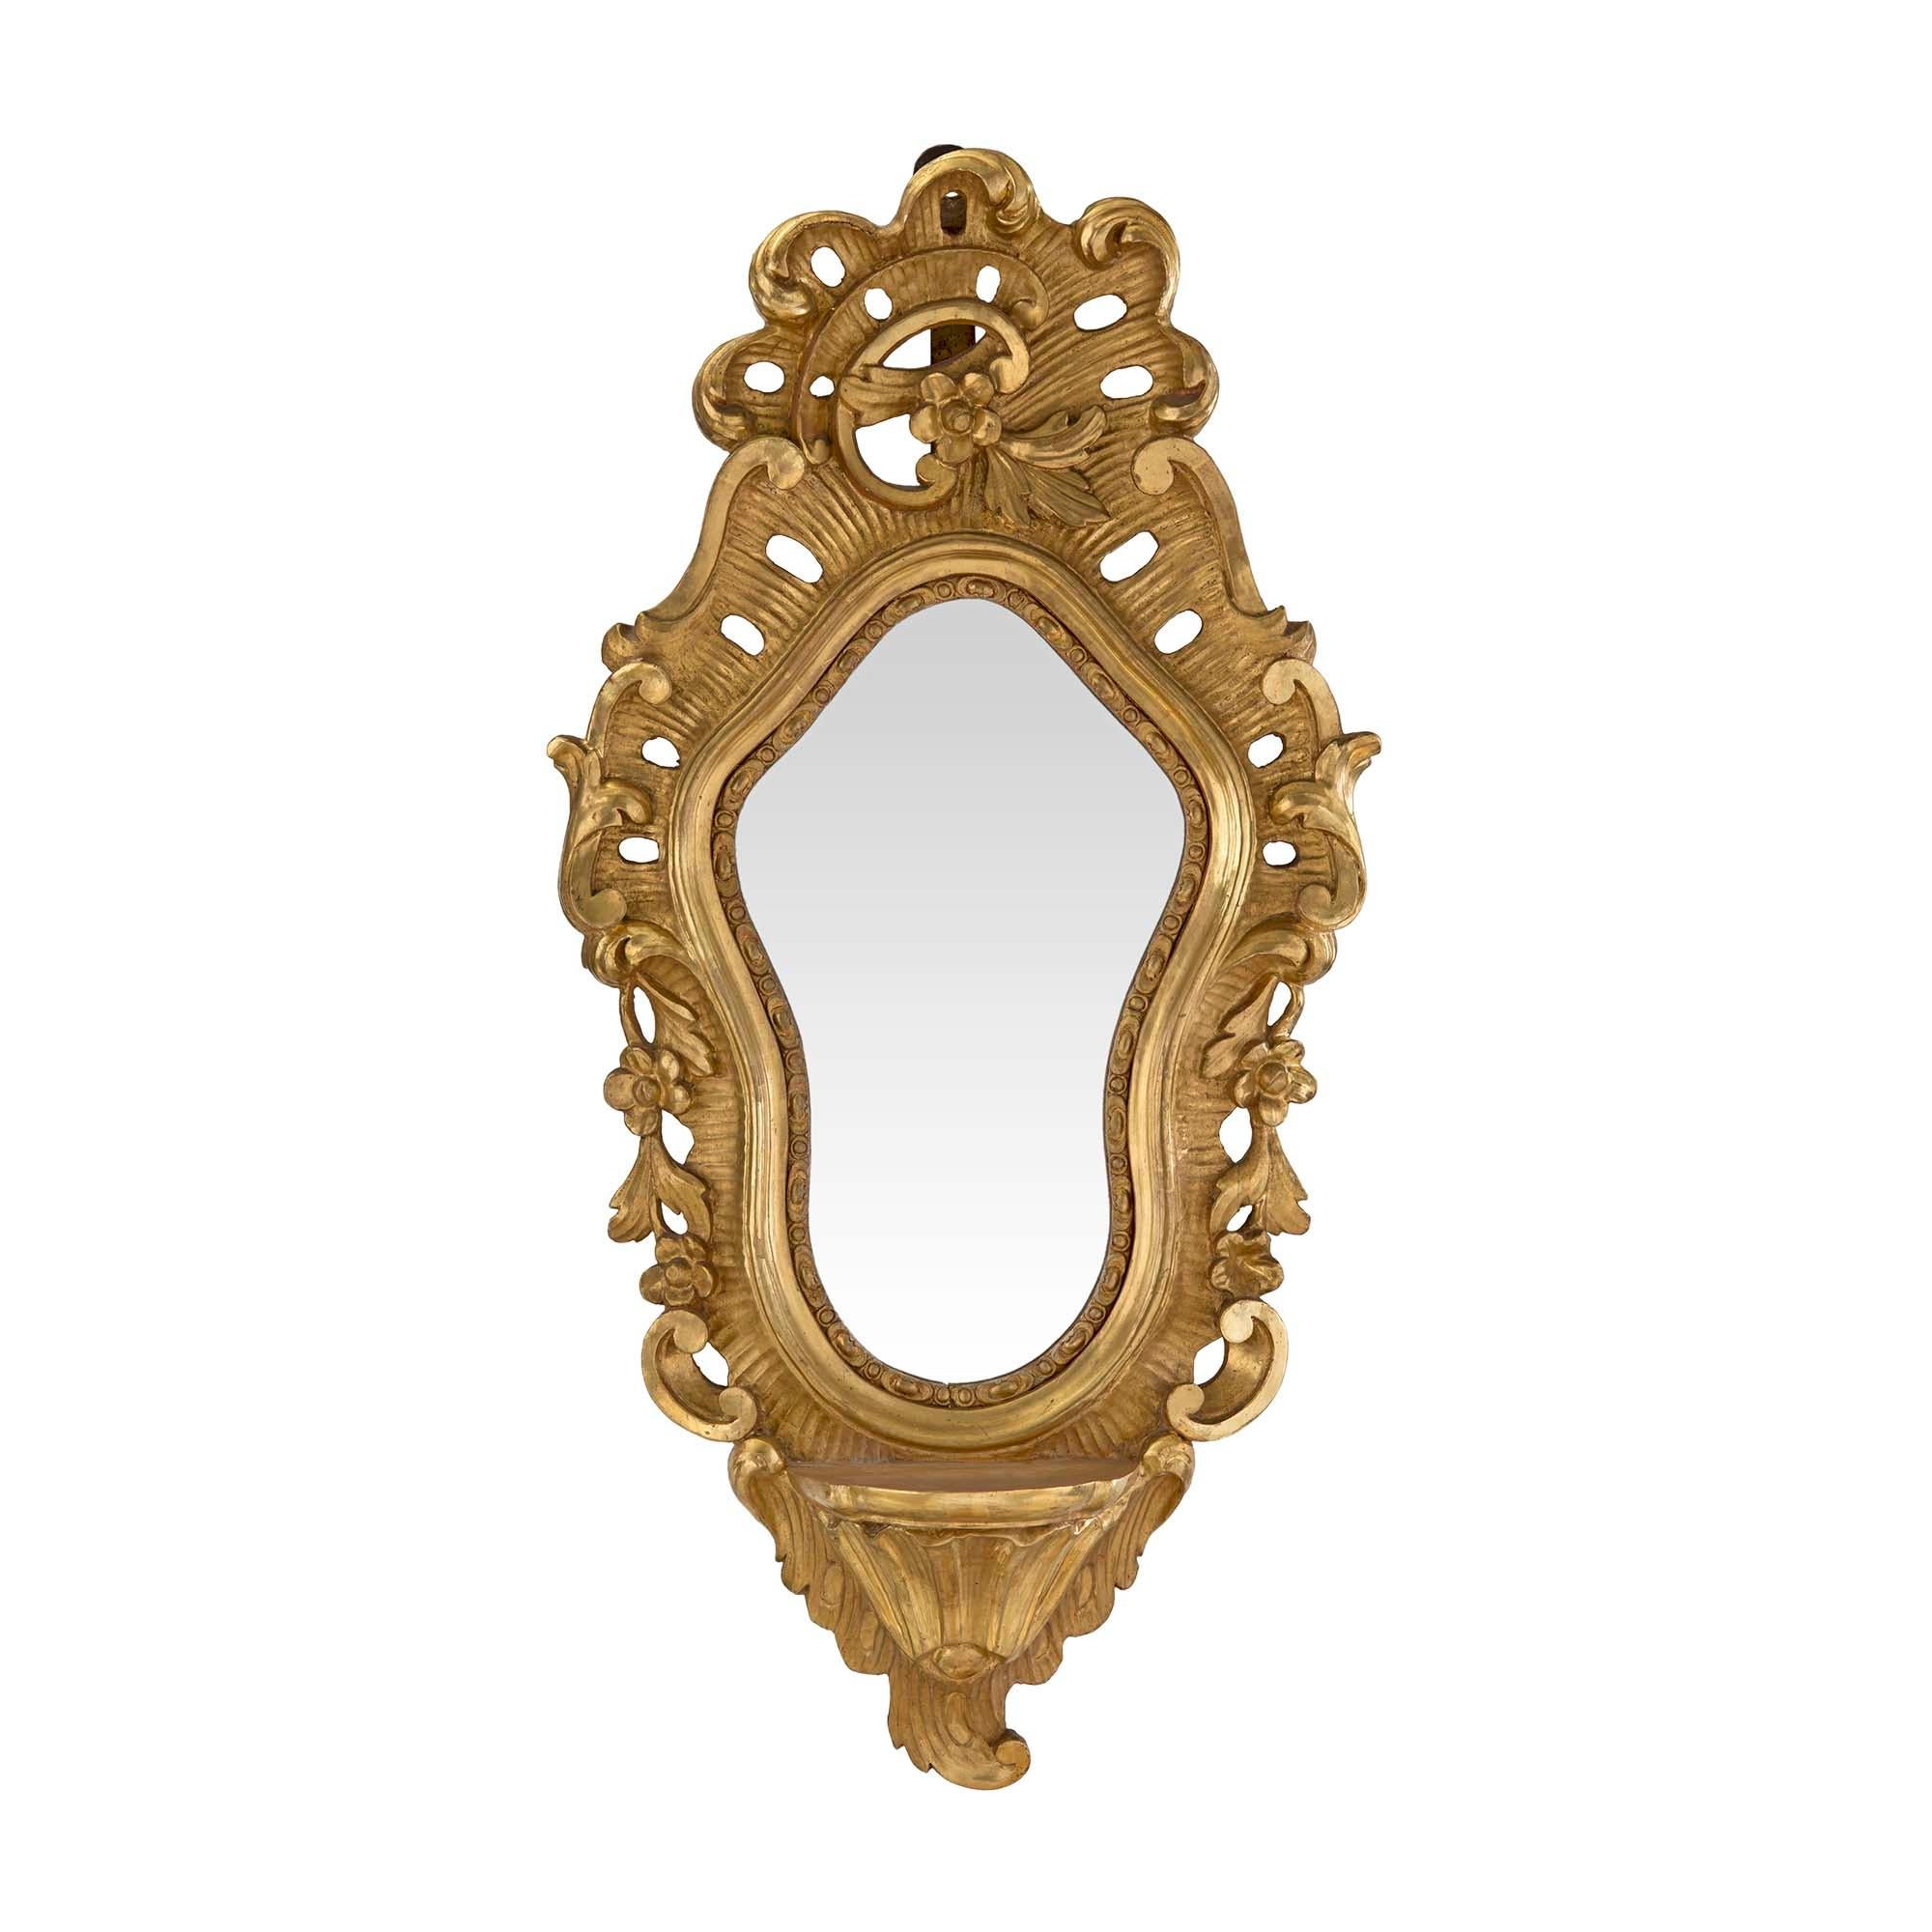 A stunning pair of Italian 19th century Baroque mirrored giltwood wall brackets. The finely carved wall brackets have a shelf at the bottom. Scrolls and foliate designs decorate the pierced frame centered by a lovely contoured mirror. With a